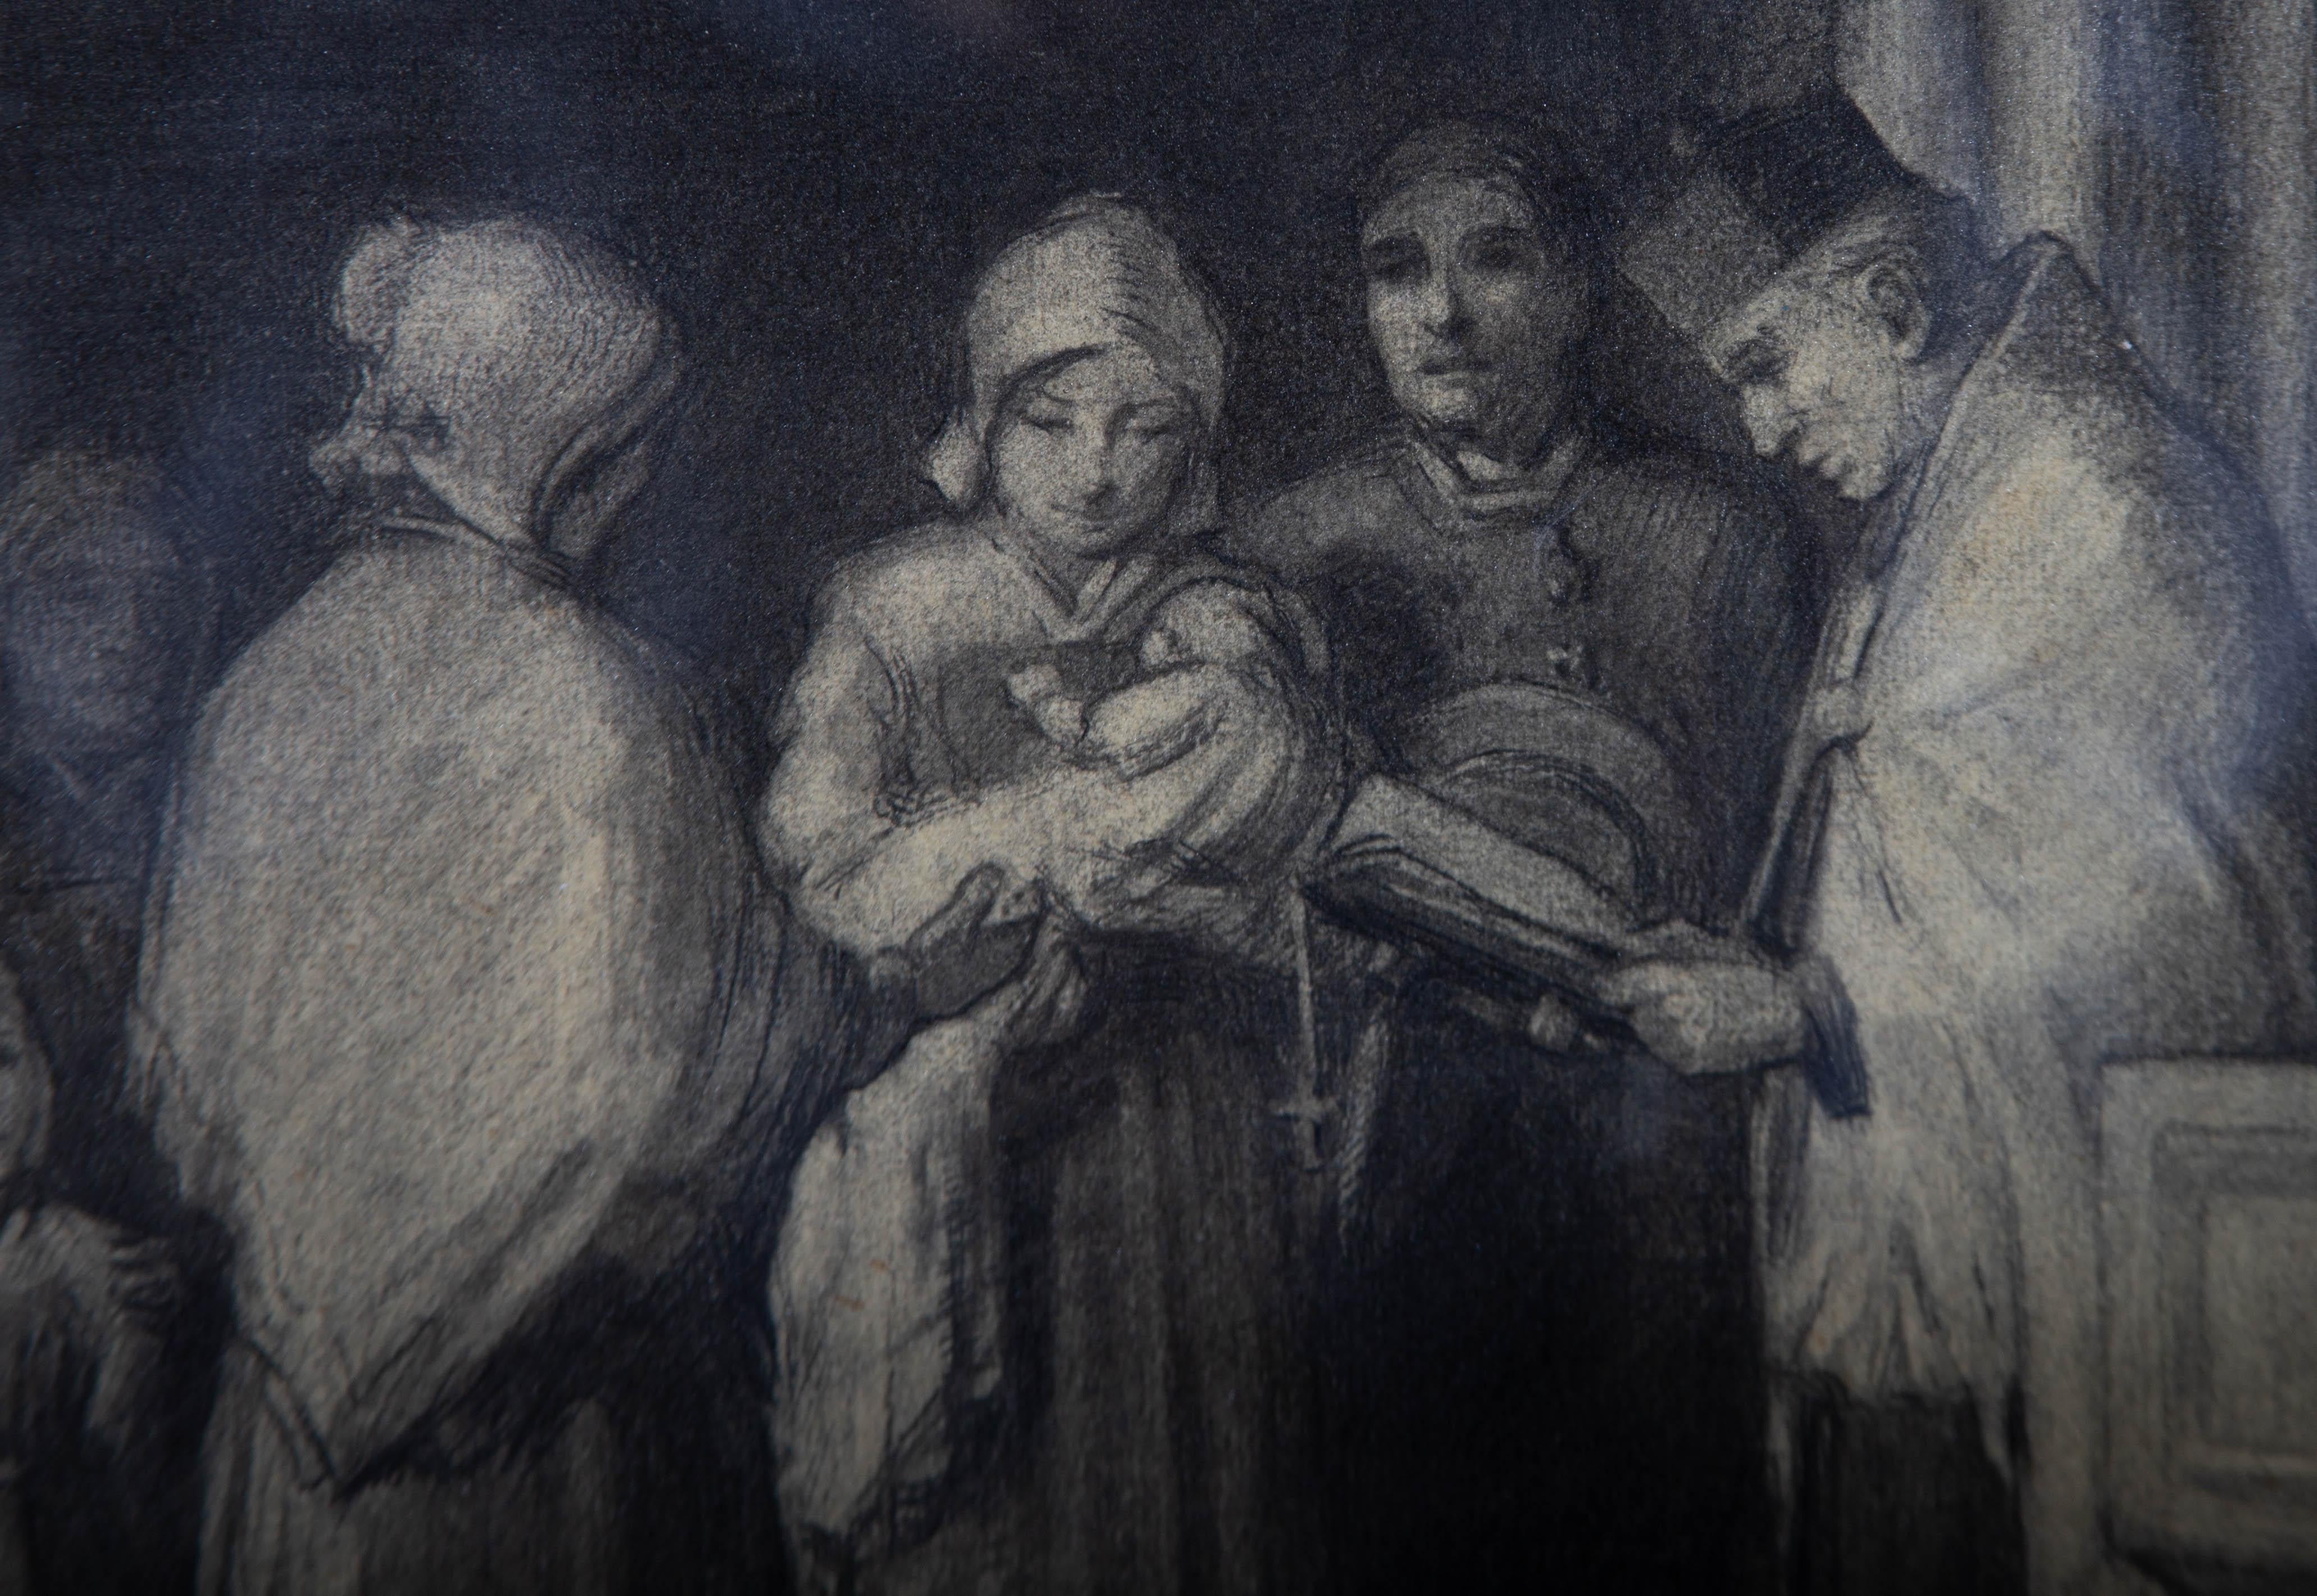 A very finely wrought charcoal drawing of a christening in a Catholic church. The interior of the church is filled with an atmospheric darkness which contrasts with the luminosity of the figures in the lower register of the composition. Presented